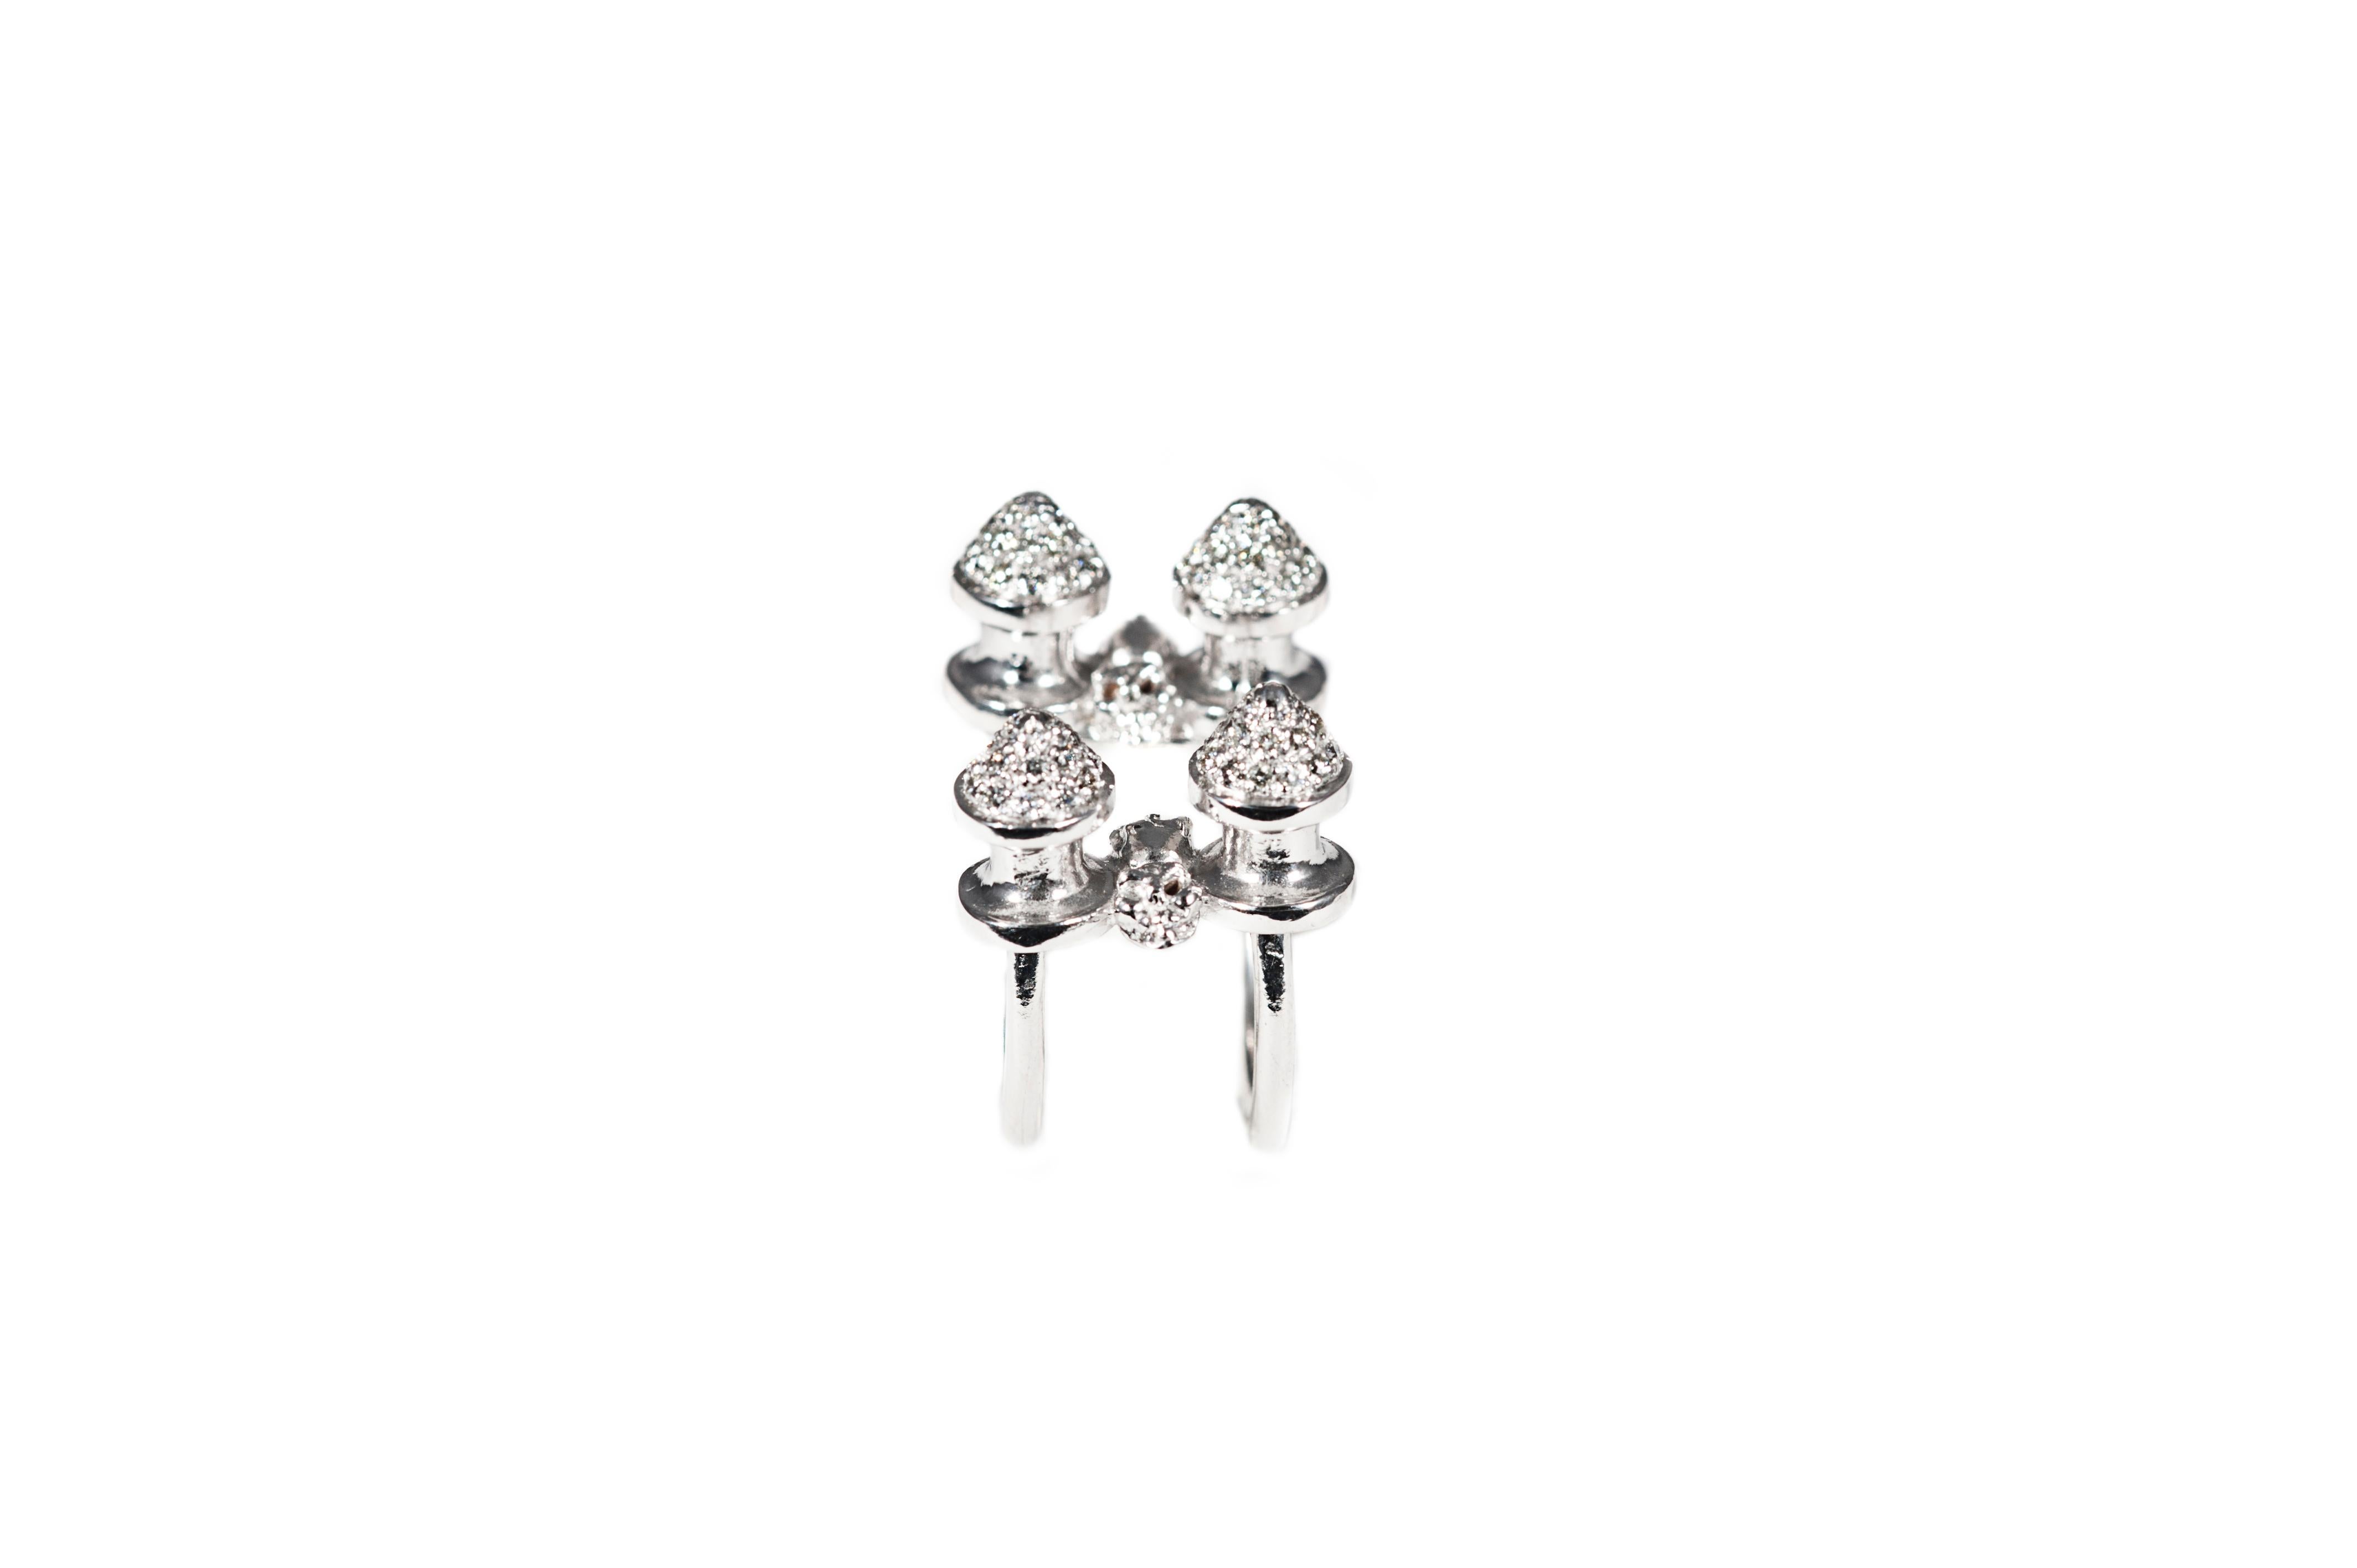 4 Studs white gold ring with diamonds

Composition:
Gold 12,30 gr (9K)
100 diamonds 1,30 ct

Size is adjustable from 5 3/4 US to 6 US ( italian size from 11 to 12)
Other sizes on demand, working time approx 15 days.